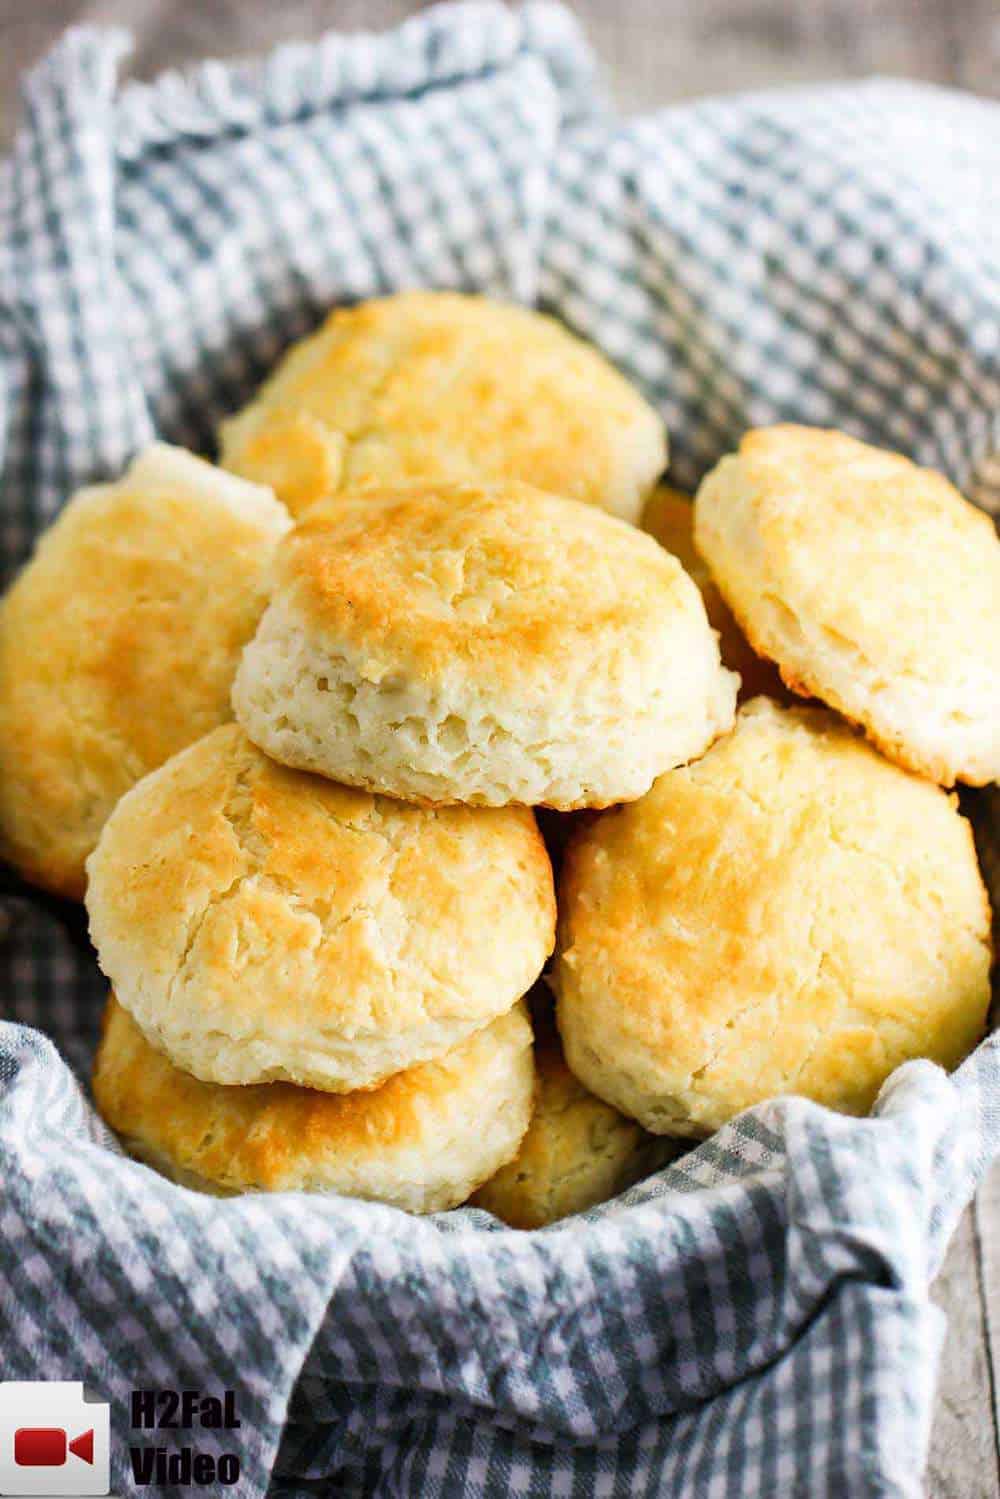 Homemade southern biscuits in a basket with a patterned napkin